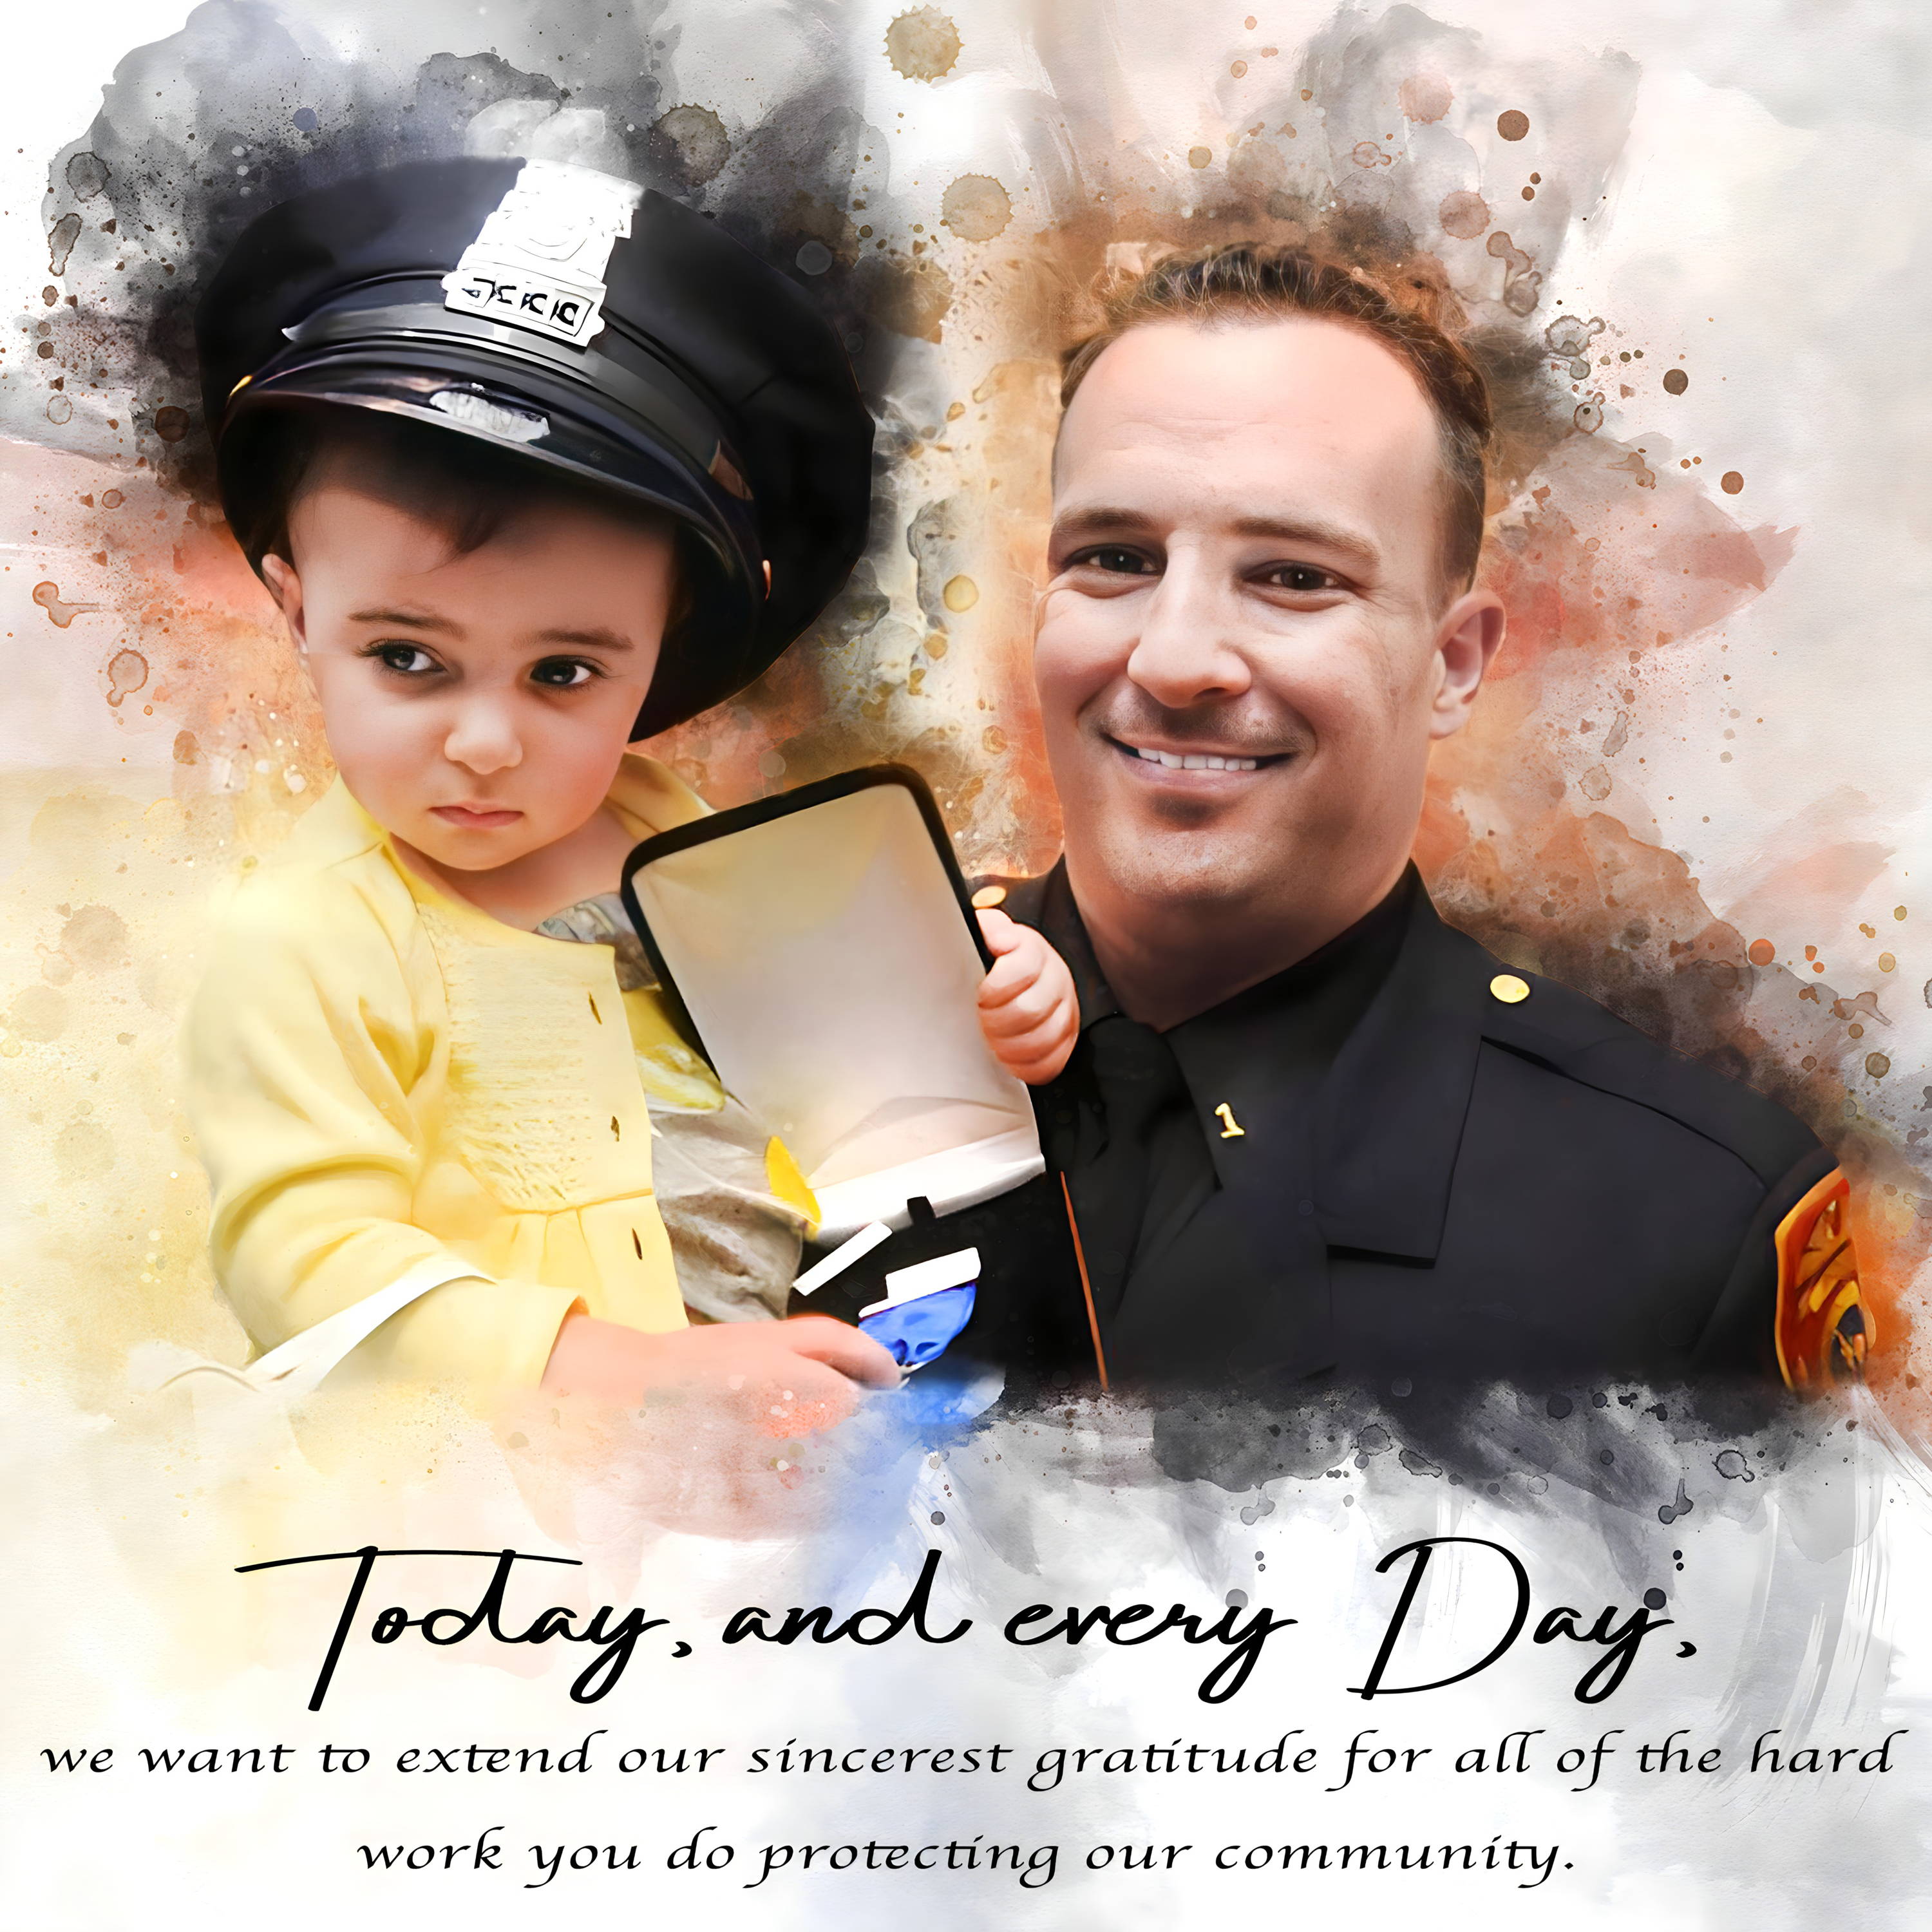 Thank you gift for Police officer | Thank you for your service| Gifts for Police Officers | Gifts for Law enforcement| Gifts for Cops | Police Retirement Present |Gifts for Policeman- FromPicToArt